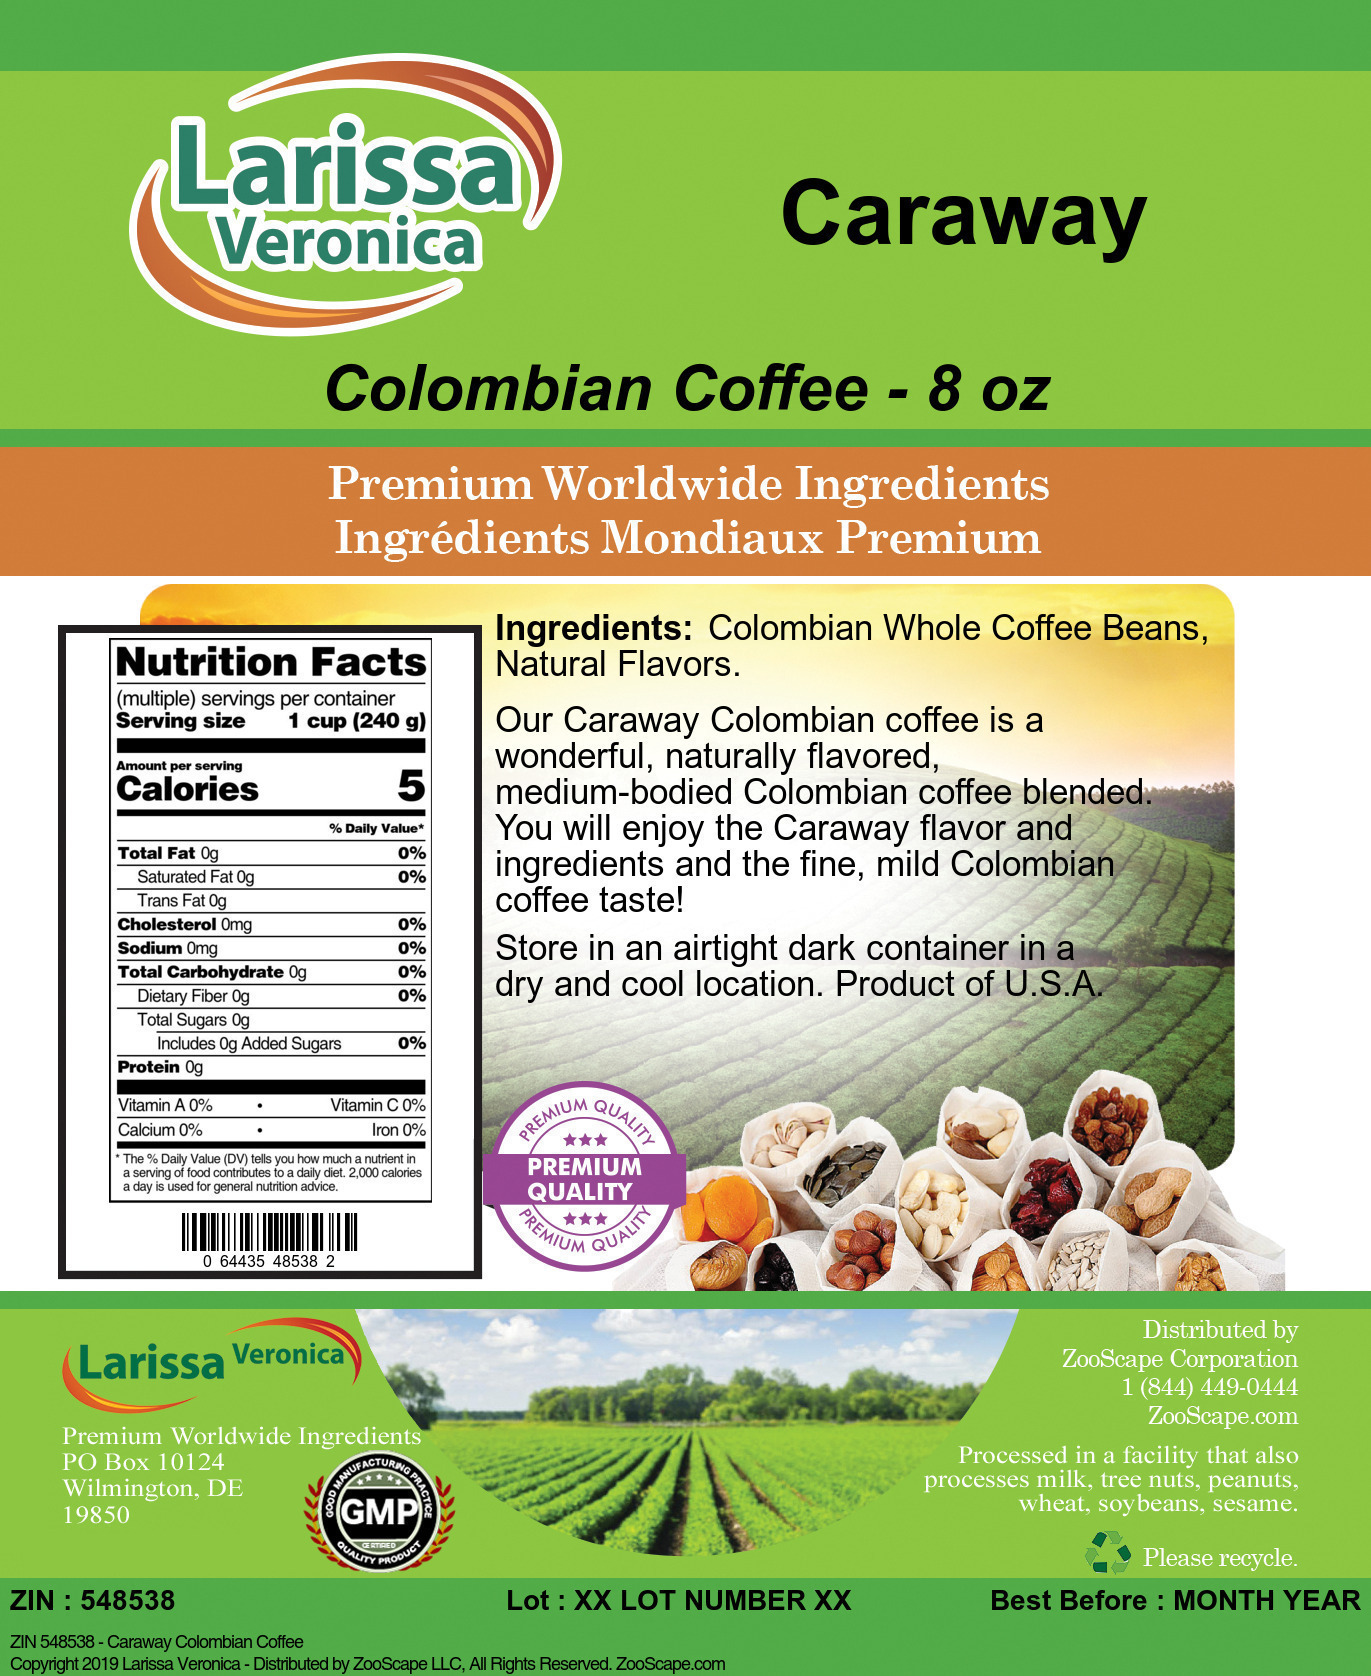 Caraway Colombian Coffee - Label